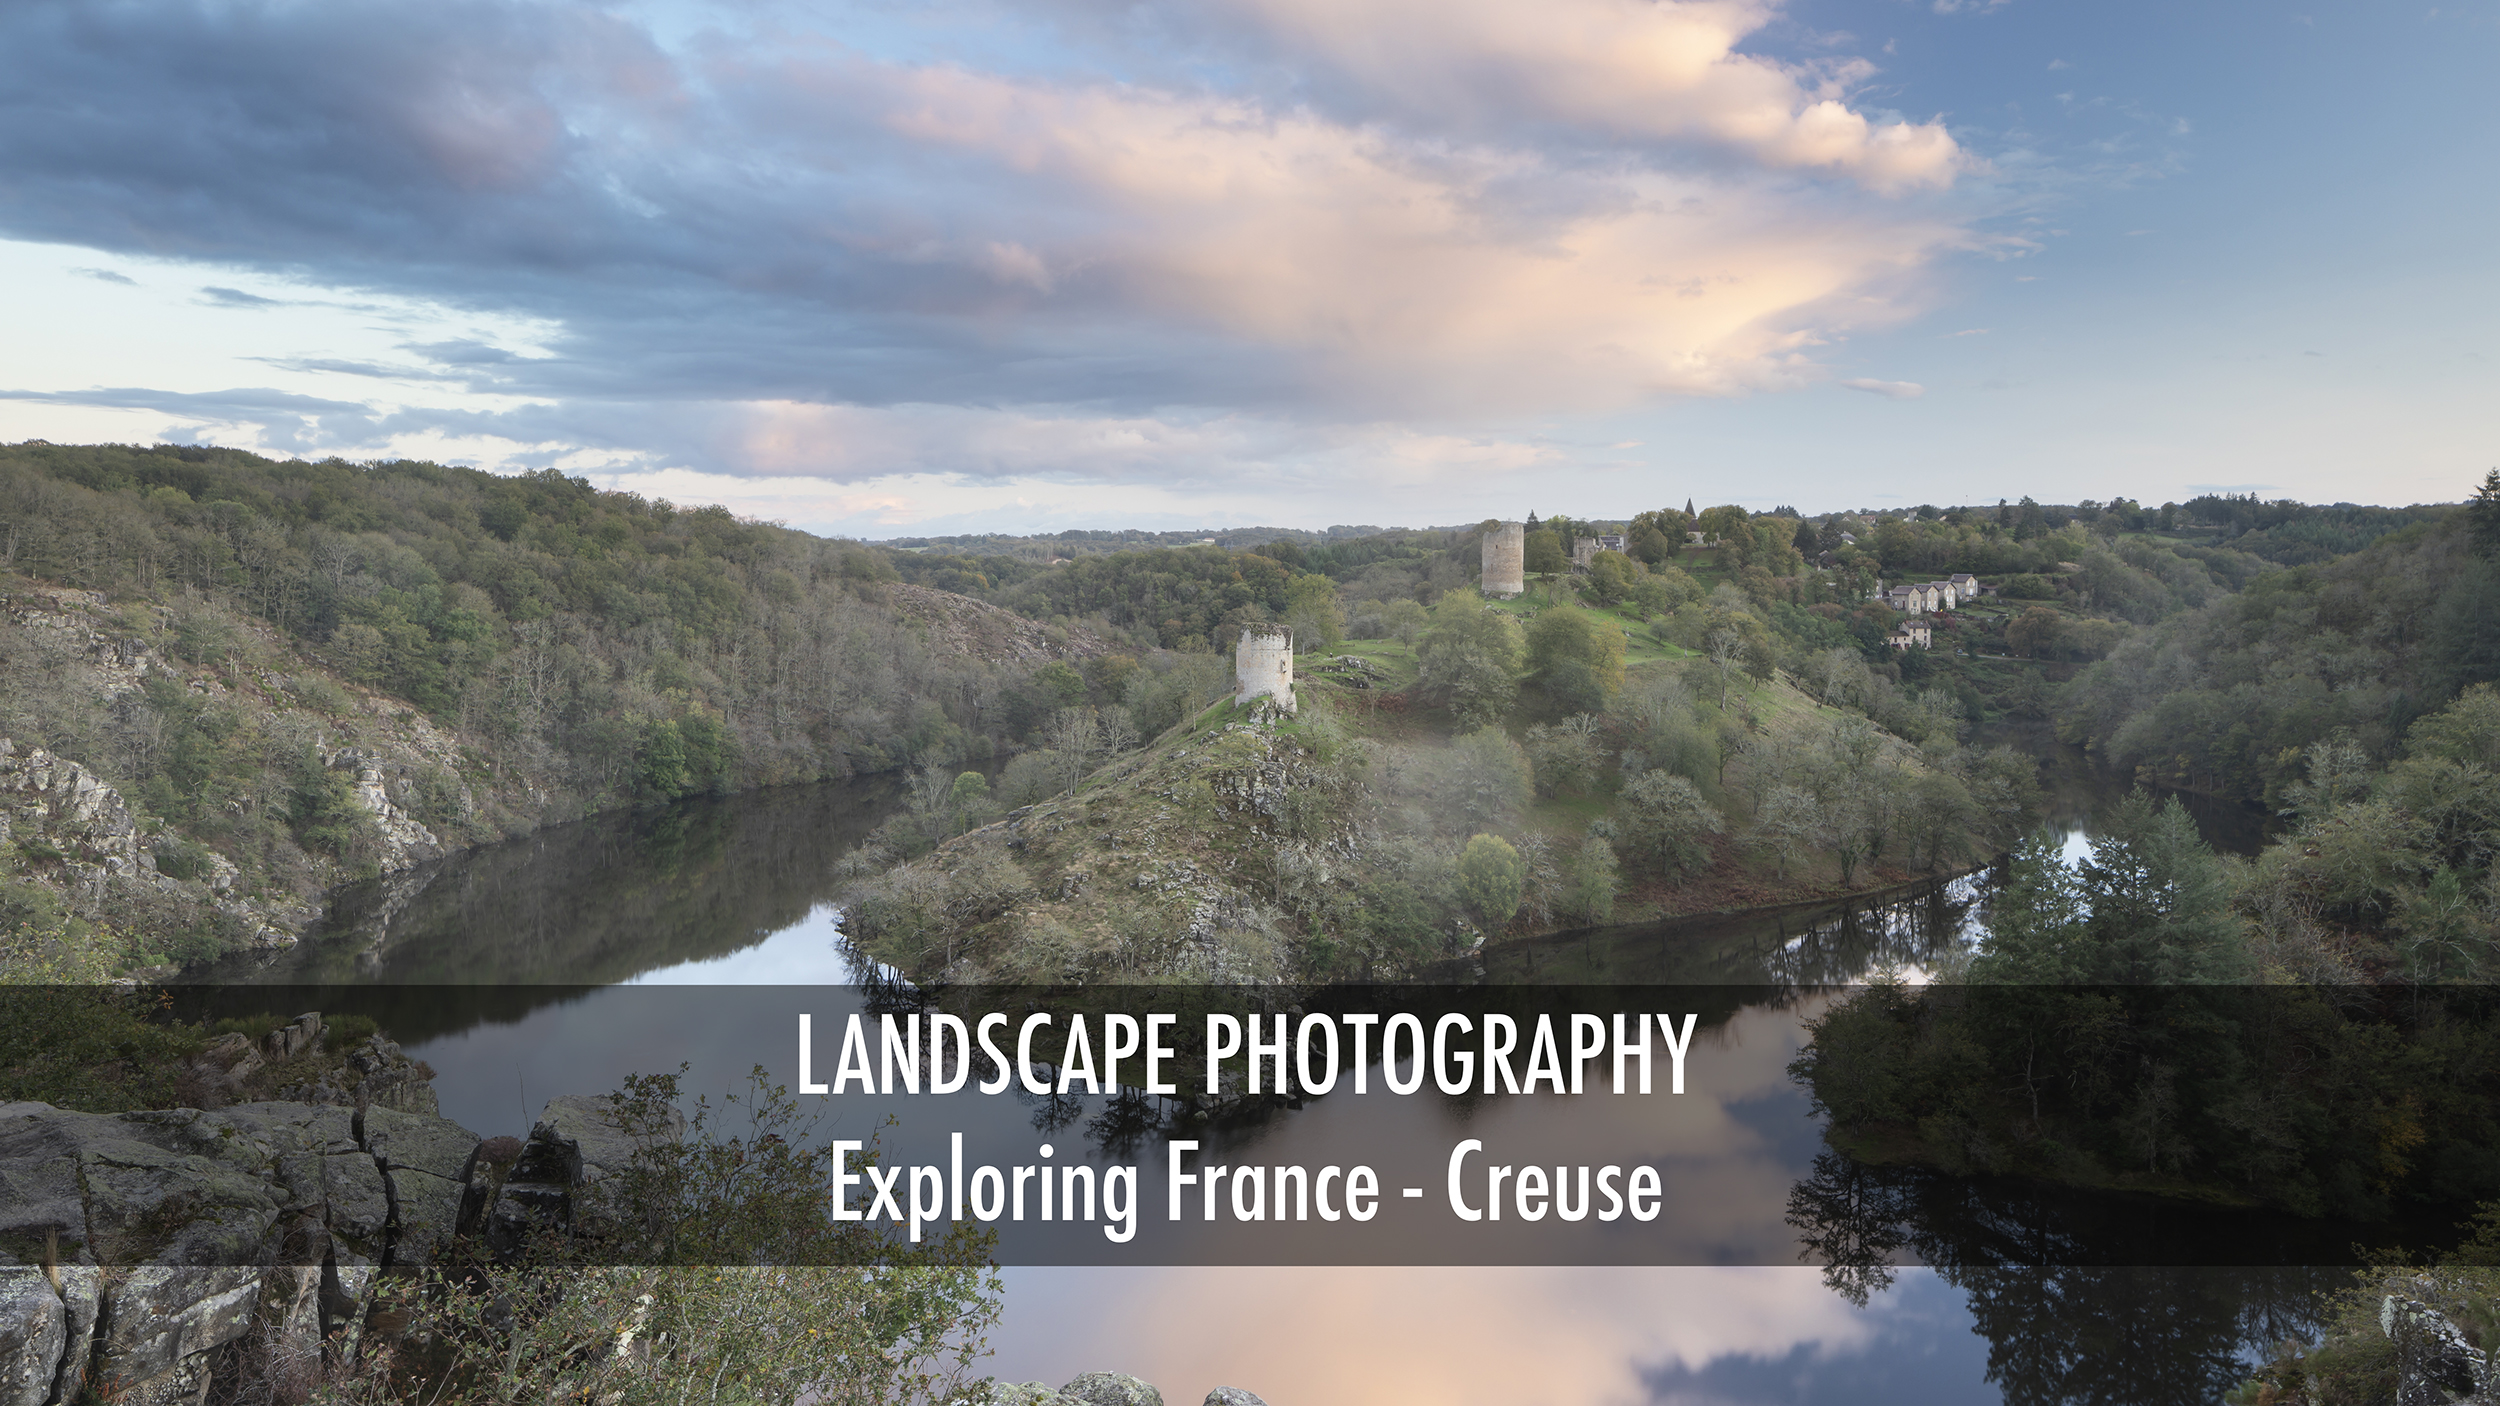 Exploring France in the department of Creuse. Landscape photography.